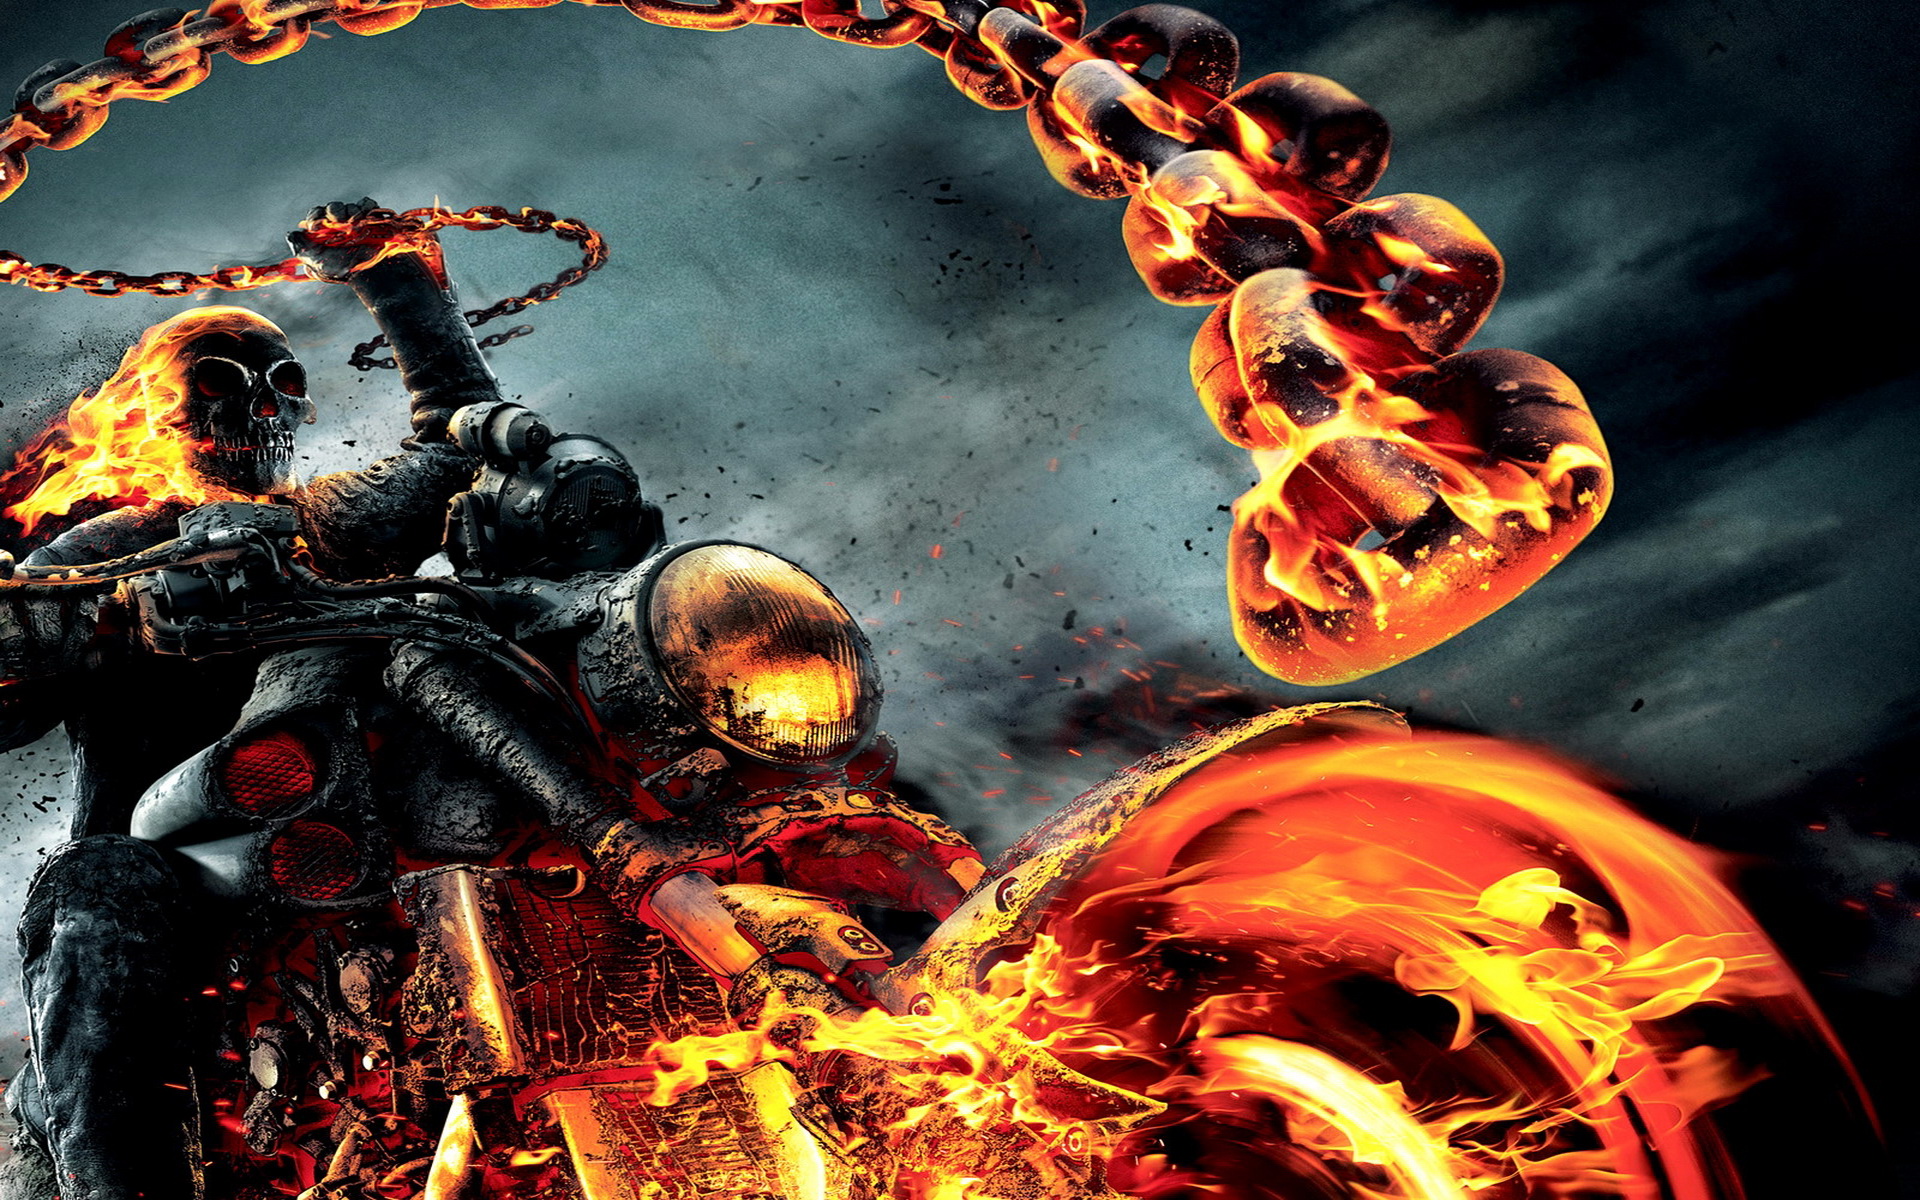 rider wallpapers full 3d ghost rider wallpapers xcitefun ghost rider